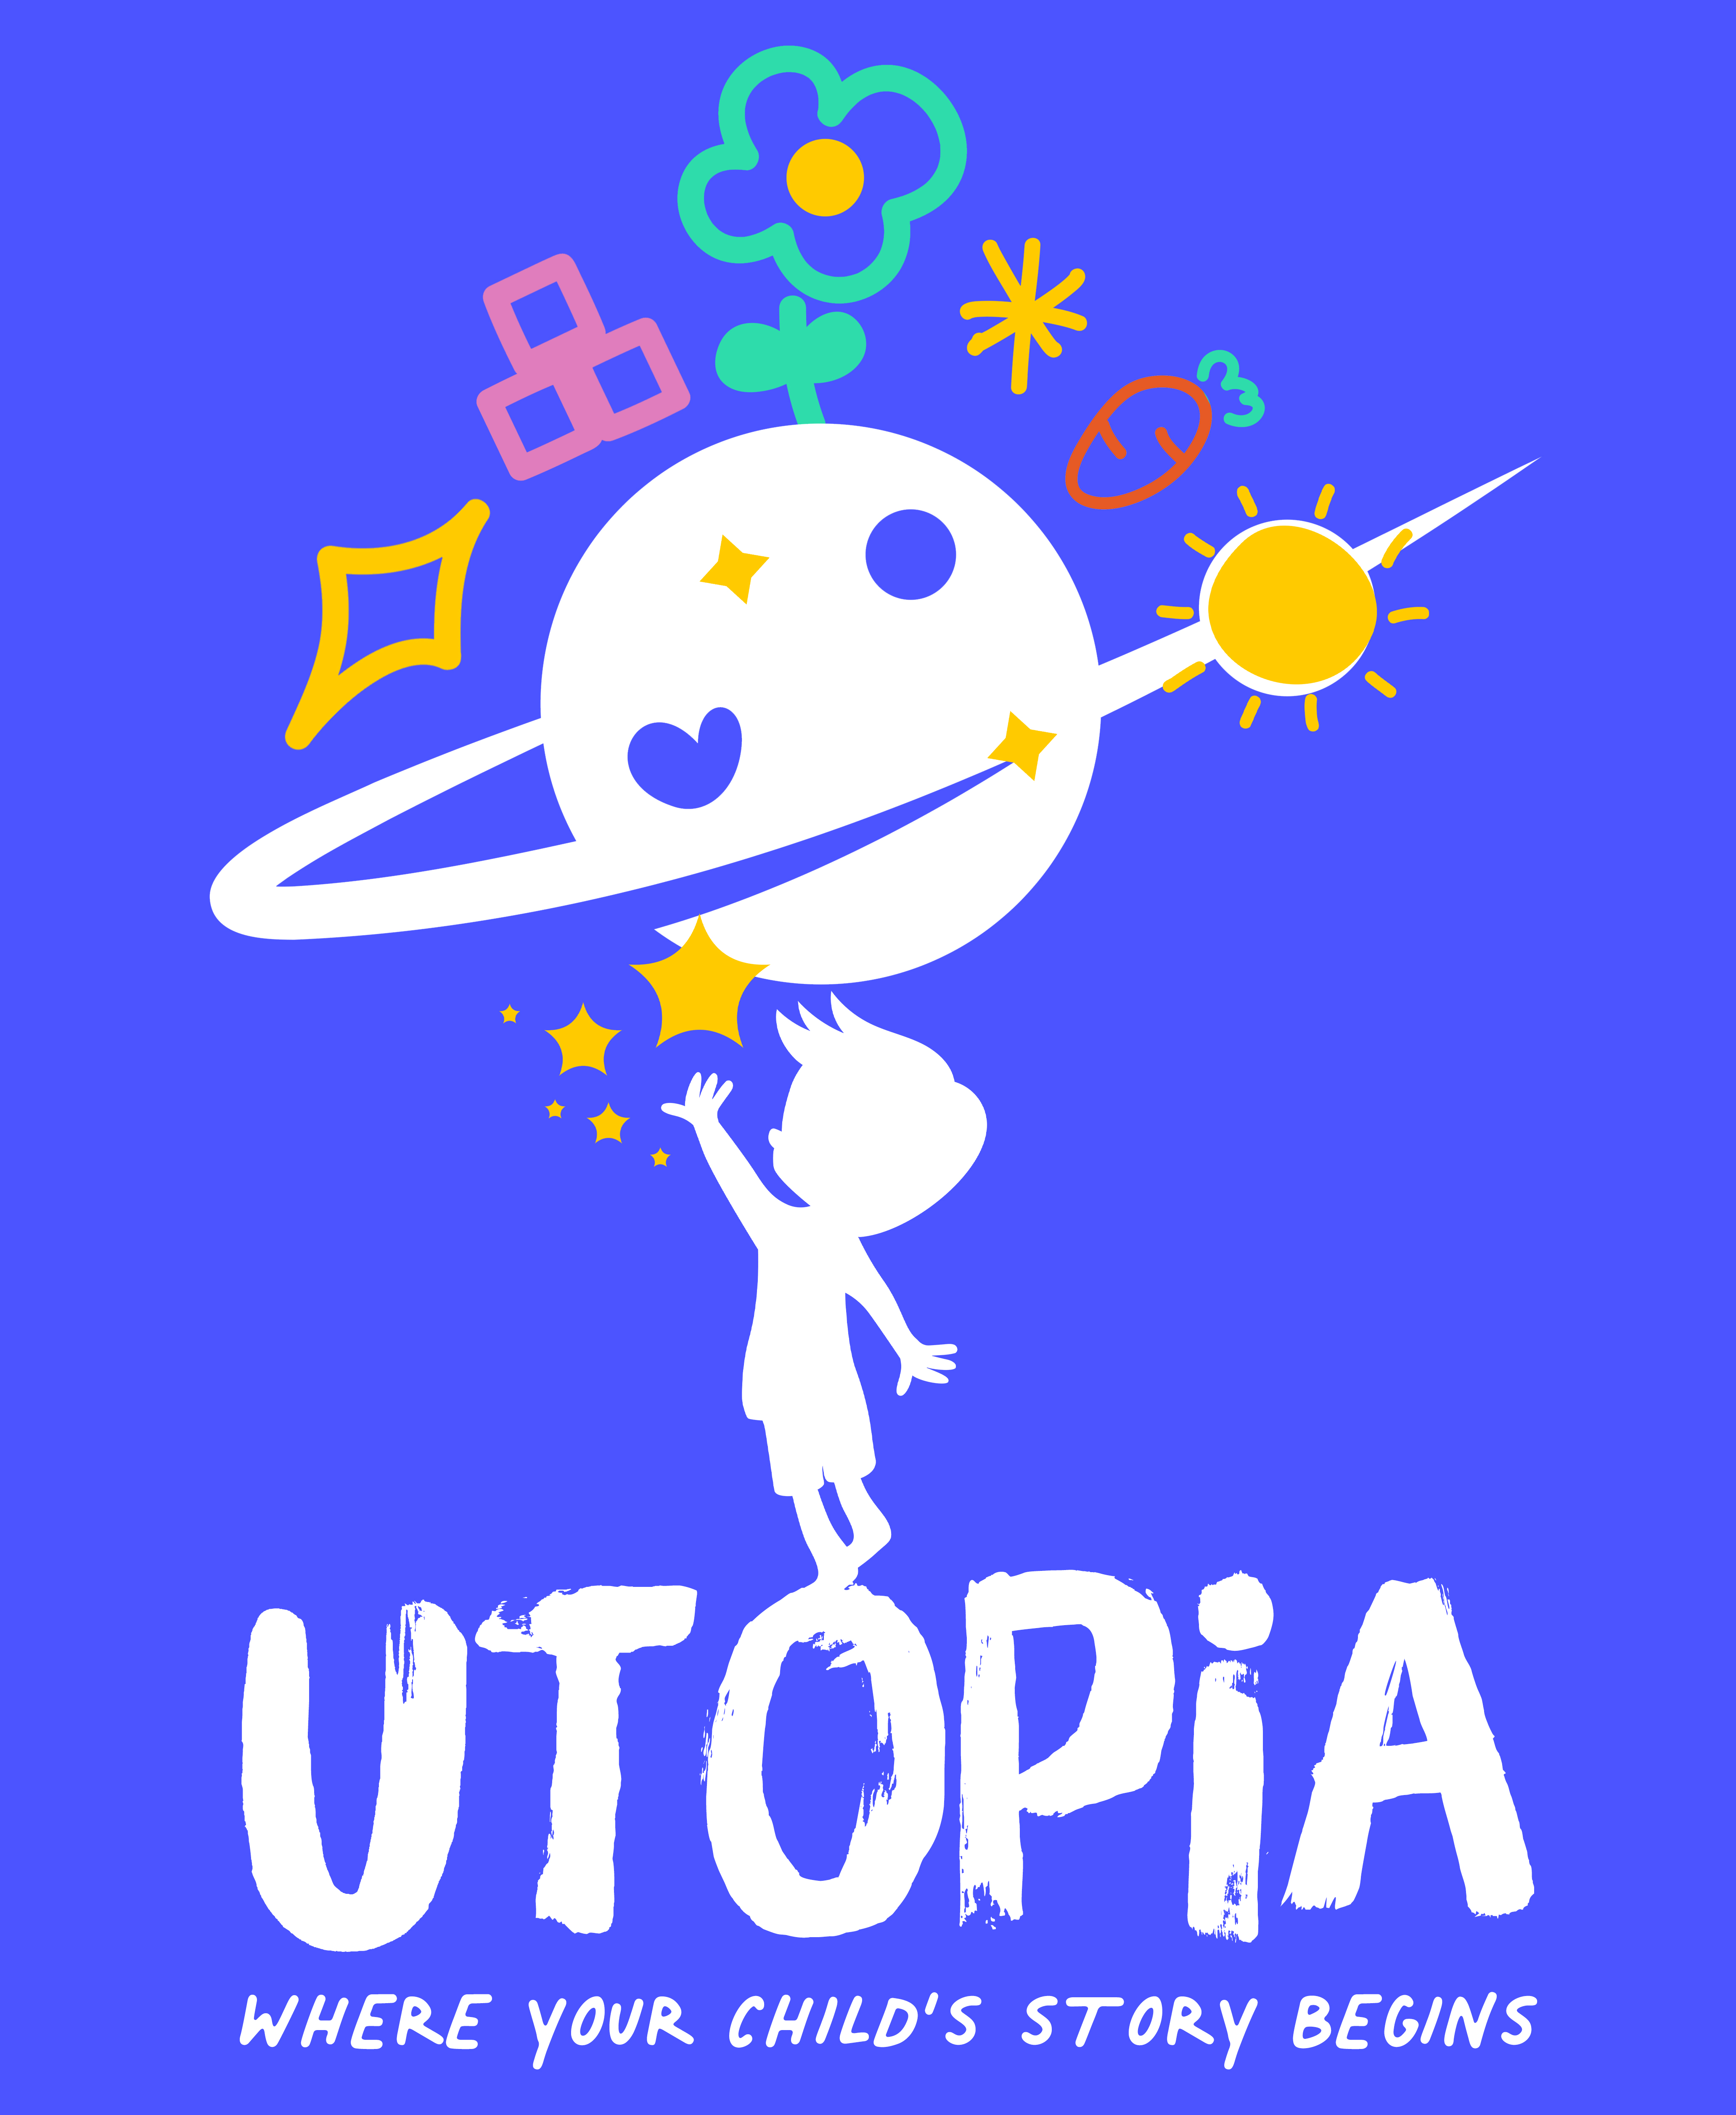 A silhouette of a boy touching stars and a planet, text: Utopia, Where your child's story begins